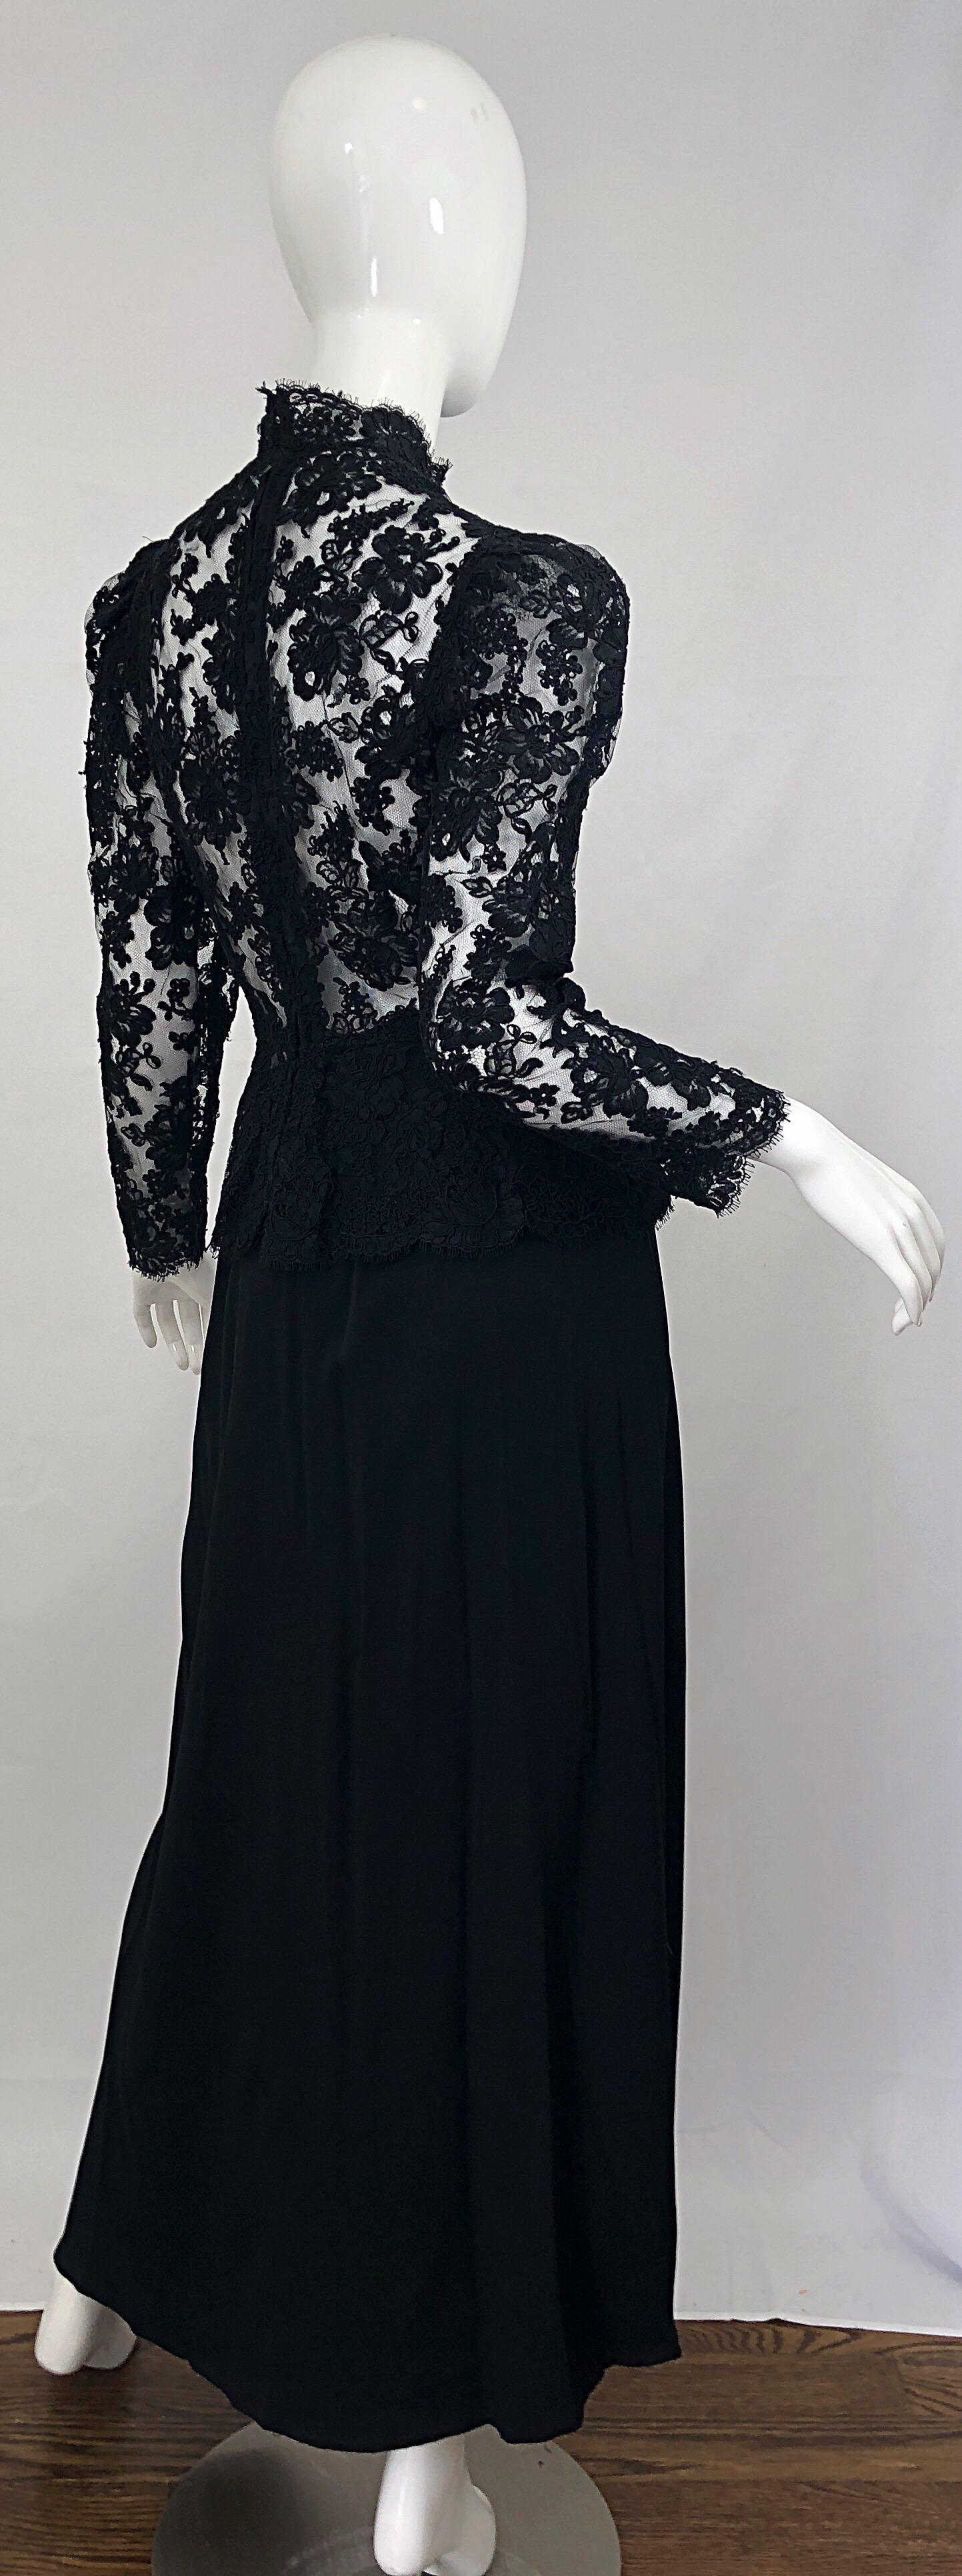 Vintage Vicky Tiel Couture 1980s Black Lace Victorian Top + Asymmetrical Skirt For Sale 6